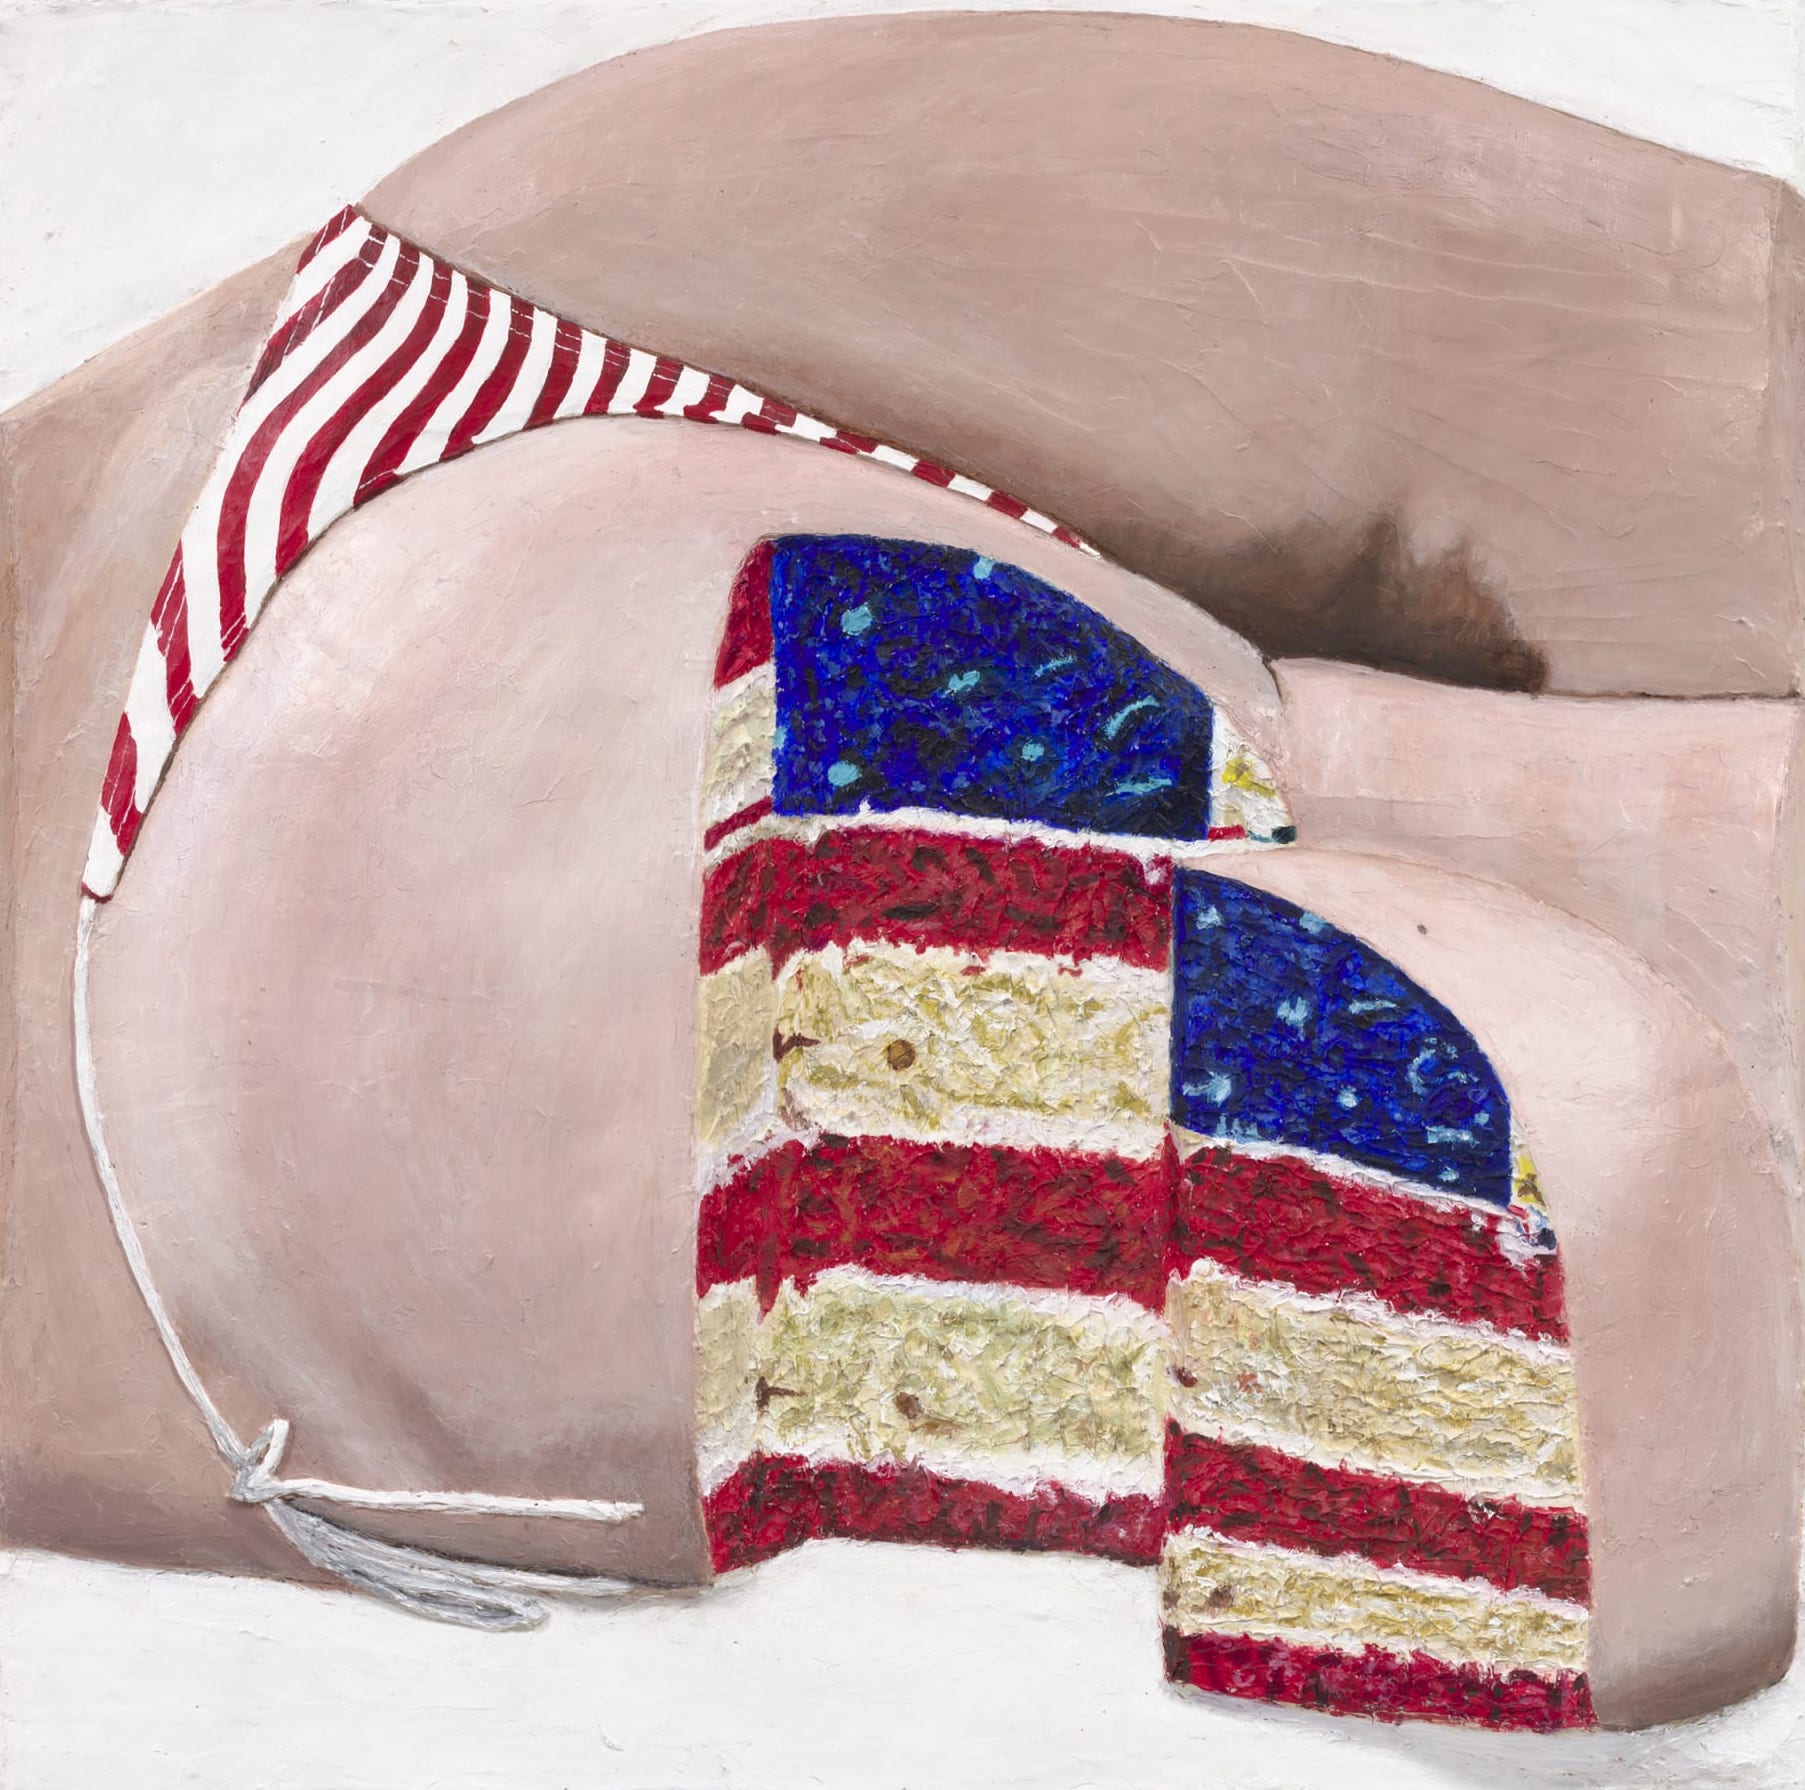 Gina Beavers, American Flag Sponge Butt Cake, 2020. Courtesy of the artist and Marianne Boesky Gallery, New York and Aspen. © Gina Beavers. Photo credit: Lance Brewer